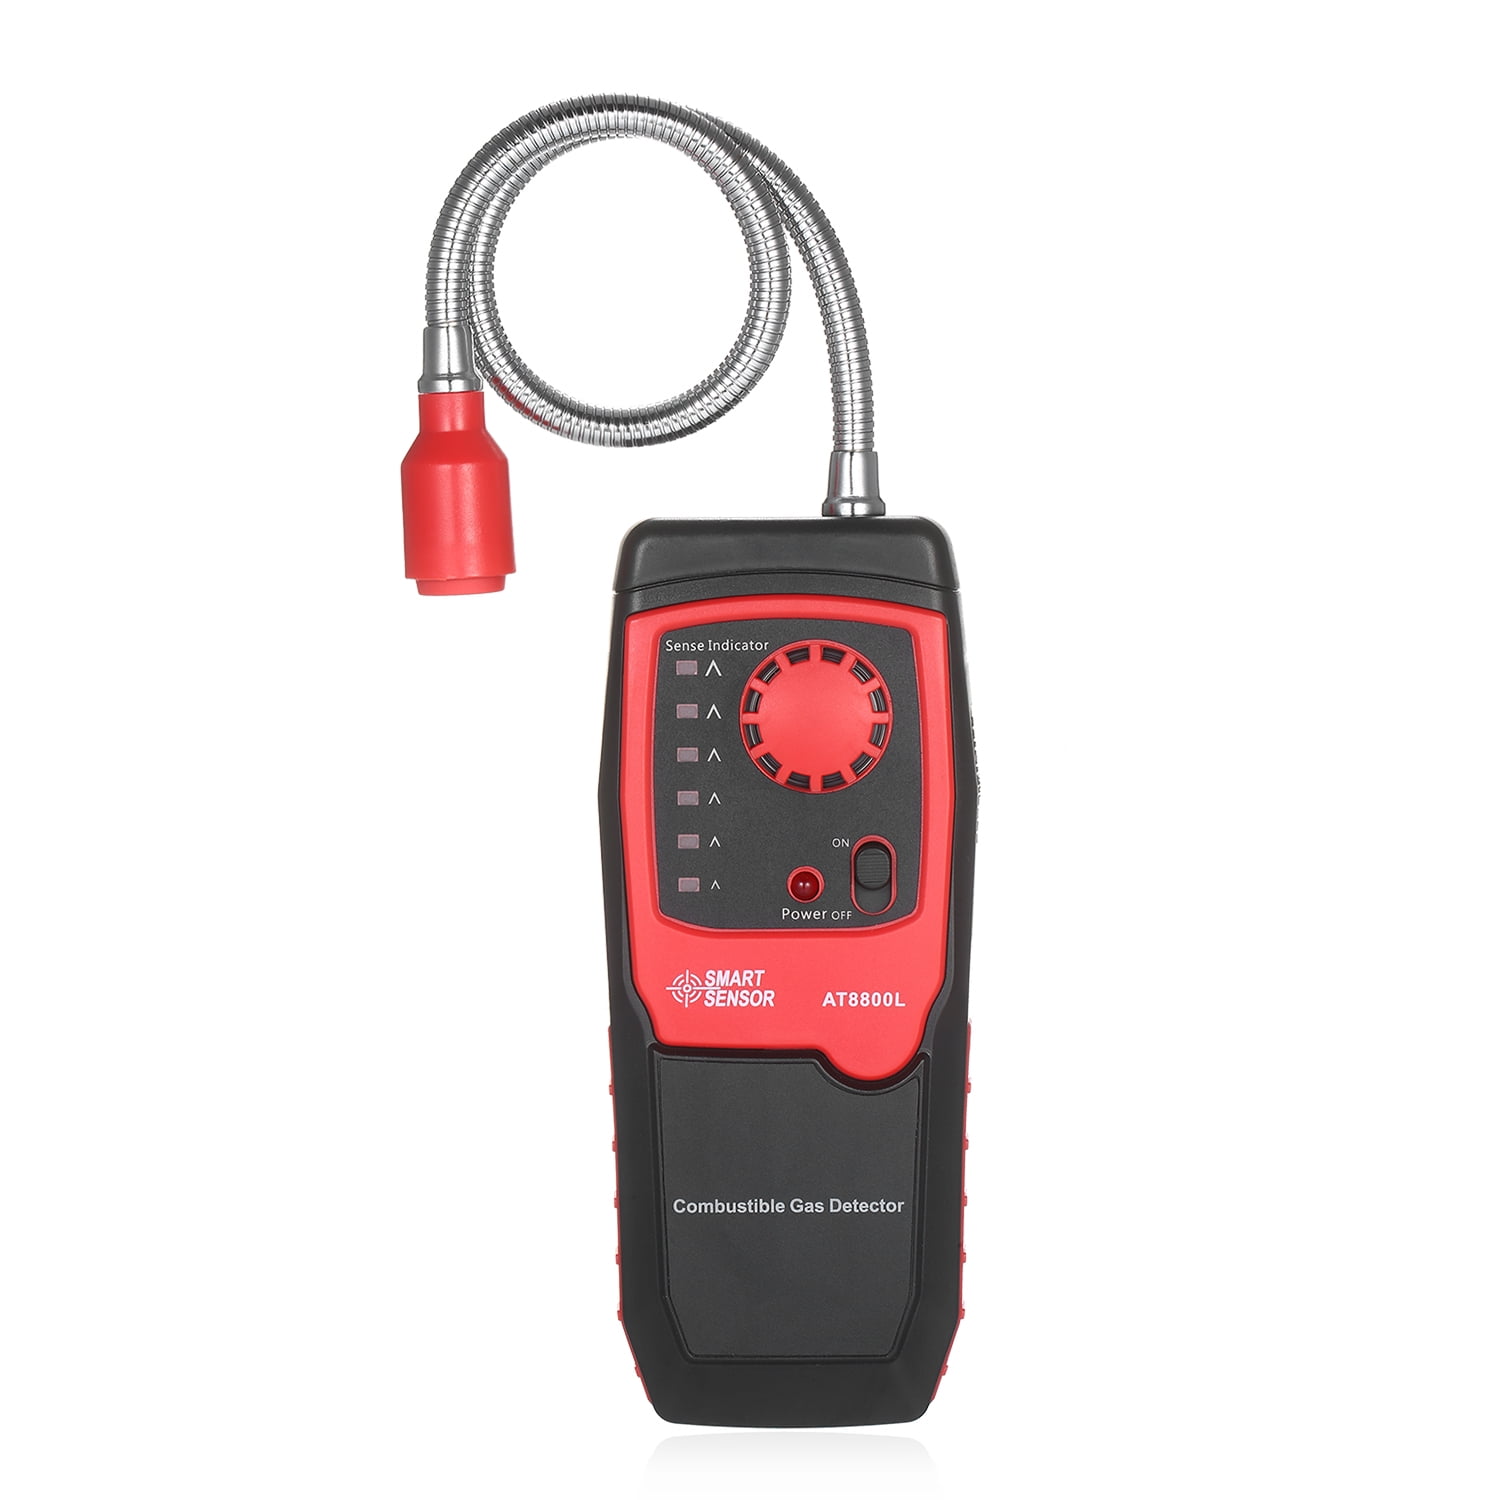 Portable Gas Leak Detector Combustible Propane Methane Gas Sensorr with Sound Warning Adjustable Sensitivity and Flex Probe Natural Gas Detector 